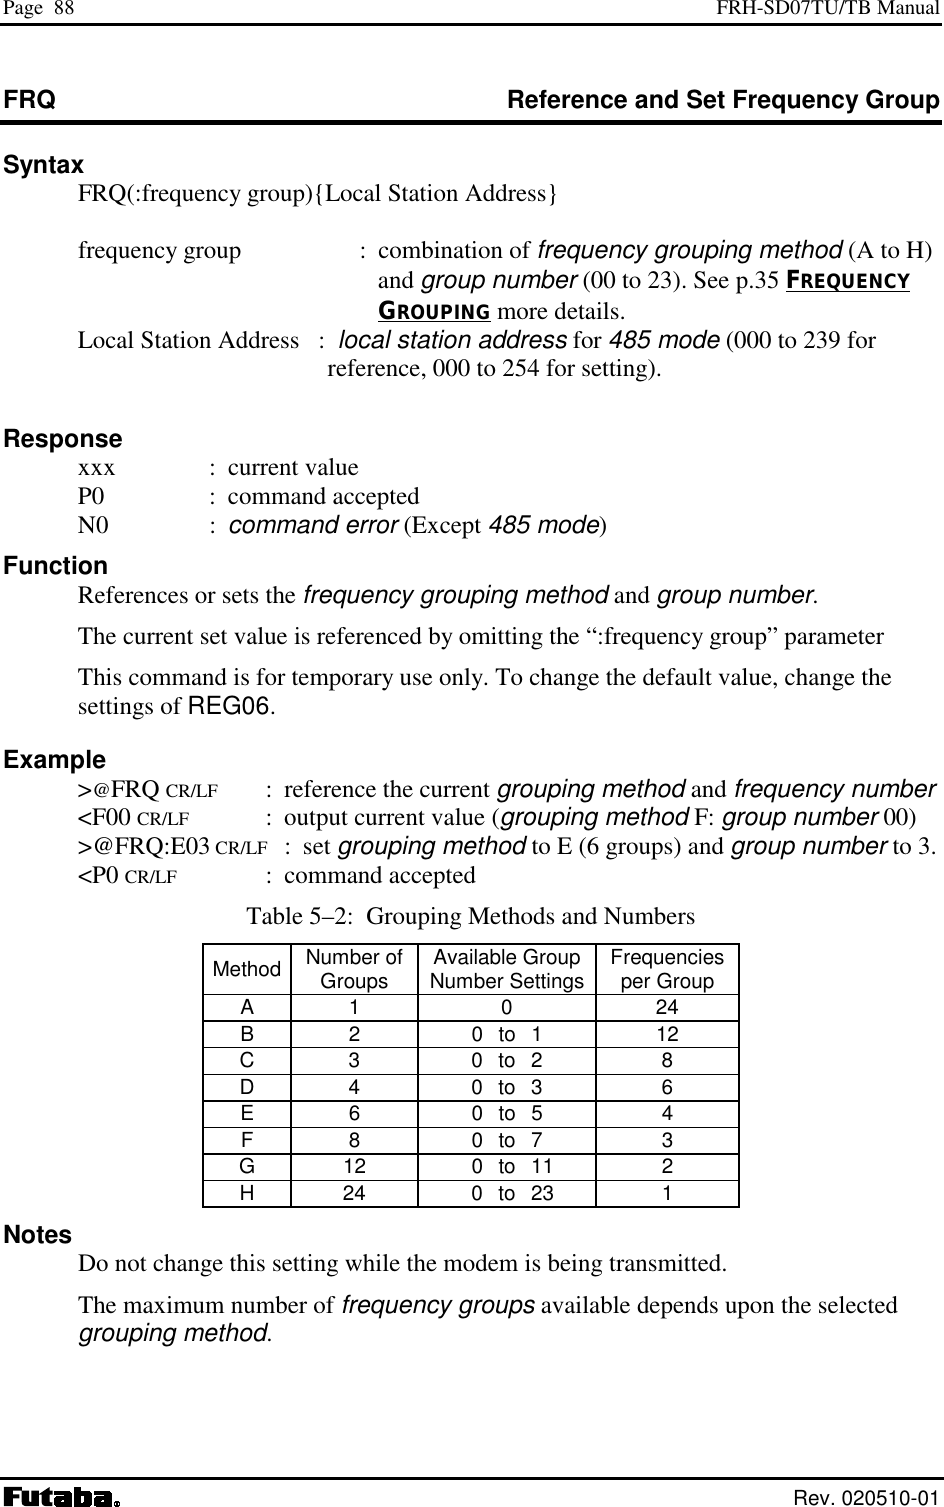 Page  88  FRH-SD07TU/TB Manual  Rev. 020510-01 FRQ  Reference and Set Frequency Group Syntax   FRQ(:frequency group){Local Station Address}    frequency group  :  combination of frequency grouping method (A to H) and group number (00 to 23). See p.35 FREQUENCY GROUPING more details.     Local Station Address   :  local station address for 485 mode (000 to 239 for reference, 000 to 254 for setting).  Response  xxx  : current value  P0  : command accepted  N0  : command error (Except 485 mode) Function   References or sets the frequency grouping method and group number.   The current set value is referenced by omitting the “:frequency group” parameter   This command is for temporary use only. To change the default value, change the settings of REG06. Example  &gt;@FRQ CR/LF  :  reference the current grouping method and frequency number  &lt;F00 CR/LF  :  output current value (grouping method F: group number 00)  &gt;@FRQ:E03 CR/LF : set grouping method to E (6 groups) and group number to 3.  &lt;P0 CR/LF : command accepted Table 5–2:  Grouping Methods and Numbers Method  Number of Groups  Available Group Number Settings  Frequencies per Group A 1   0   24 B  2  0 to 1  12 C  3  0 to 2  8 D  4  0 to 3  6 E  6  0 to 5  4 F  8  0 to 7  3 G  12  0 to 11  2 H  24  0 to 23  1 Notes   Do not change this setting while the modem is being transmitted.   The maximum number of frequency groups available depends upon the selected grouping method. 